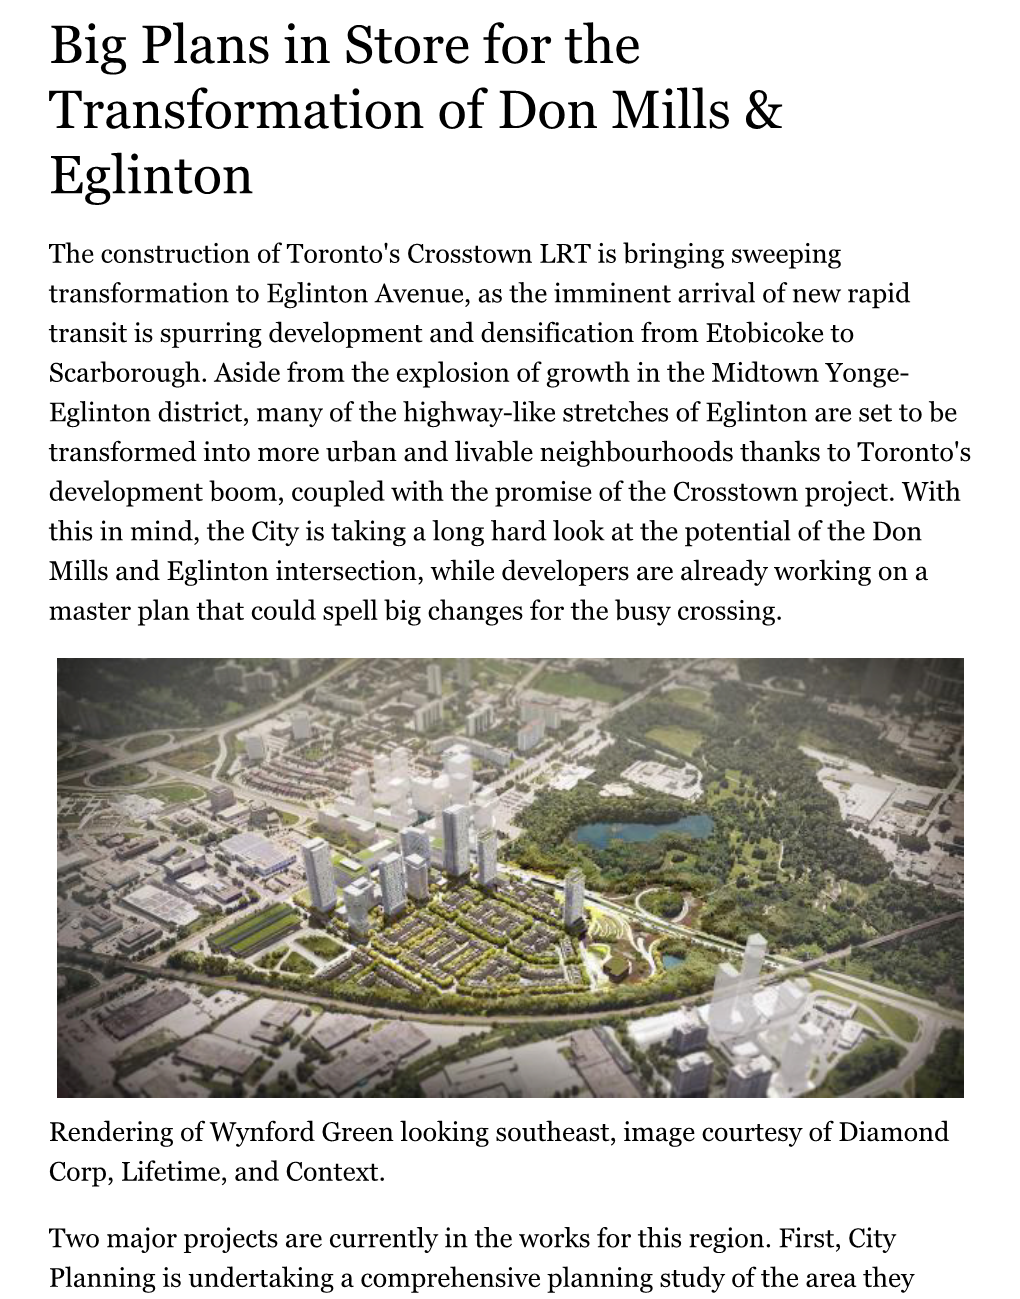 Big Plans in Store for the Transformation of Don Mills & Eglinton